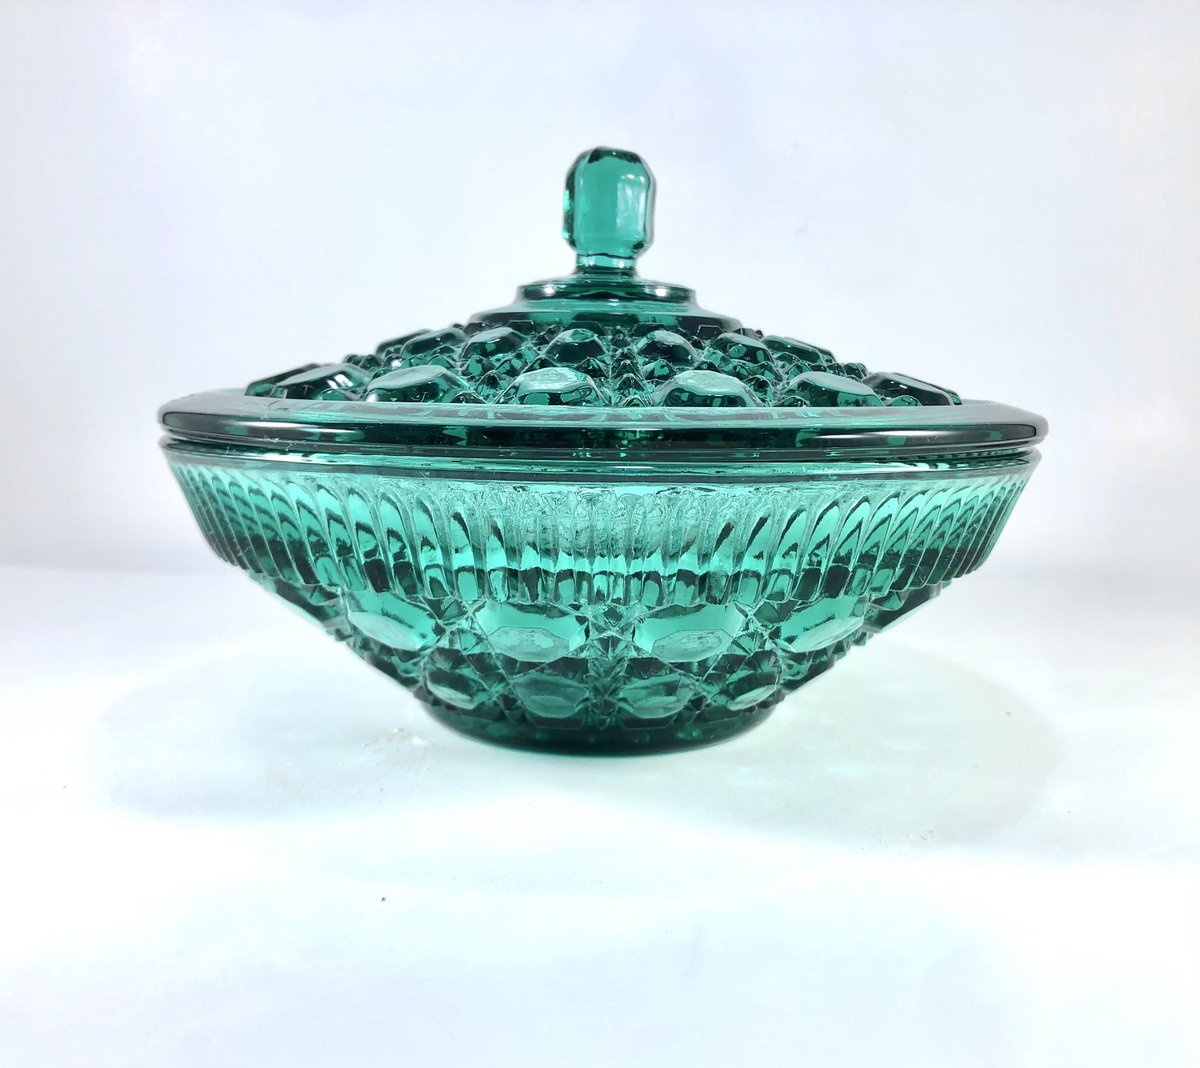 Vintage Indiana Glass Emerald Green Teal Windsor Candy Dish with Lid Retro Decor etsy.me/3oQI5Nv #pinkbellyvintage #livingwithvintage #housewarming #stpatricksday #candydish #retrocandydish #vintagecandydish #greencandydish #greenglass